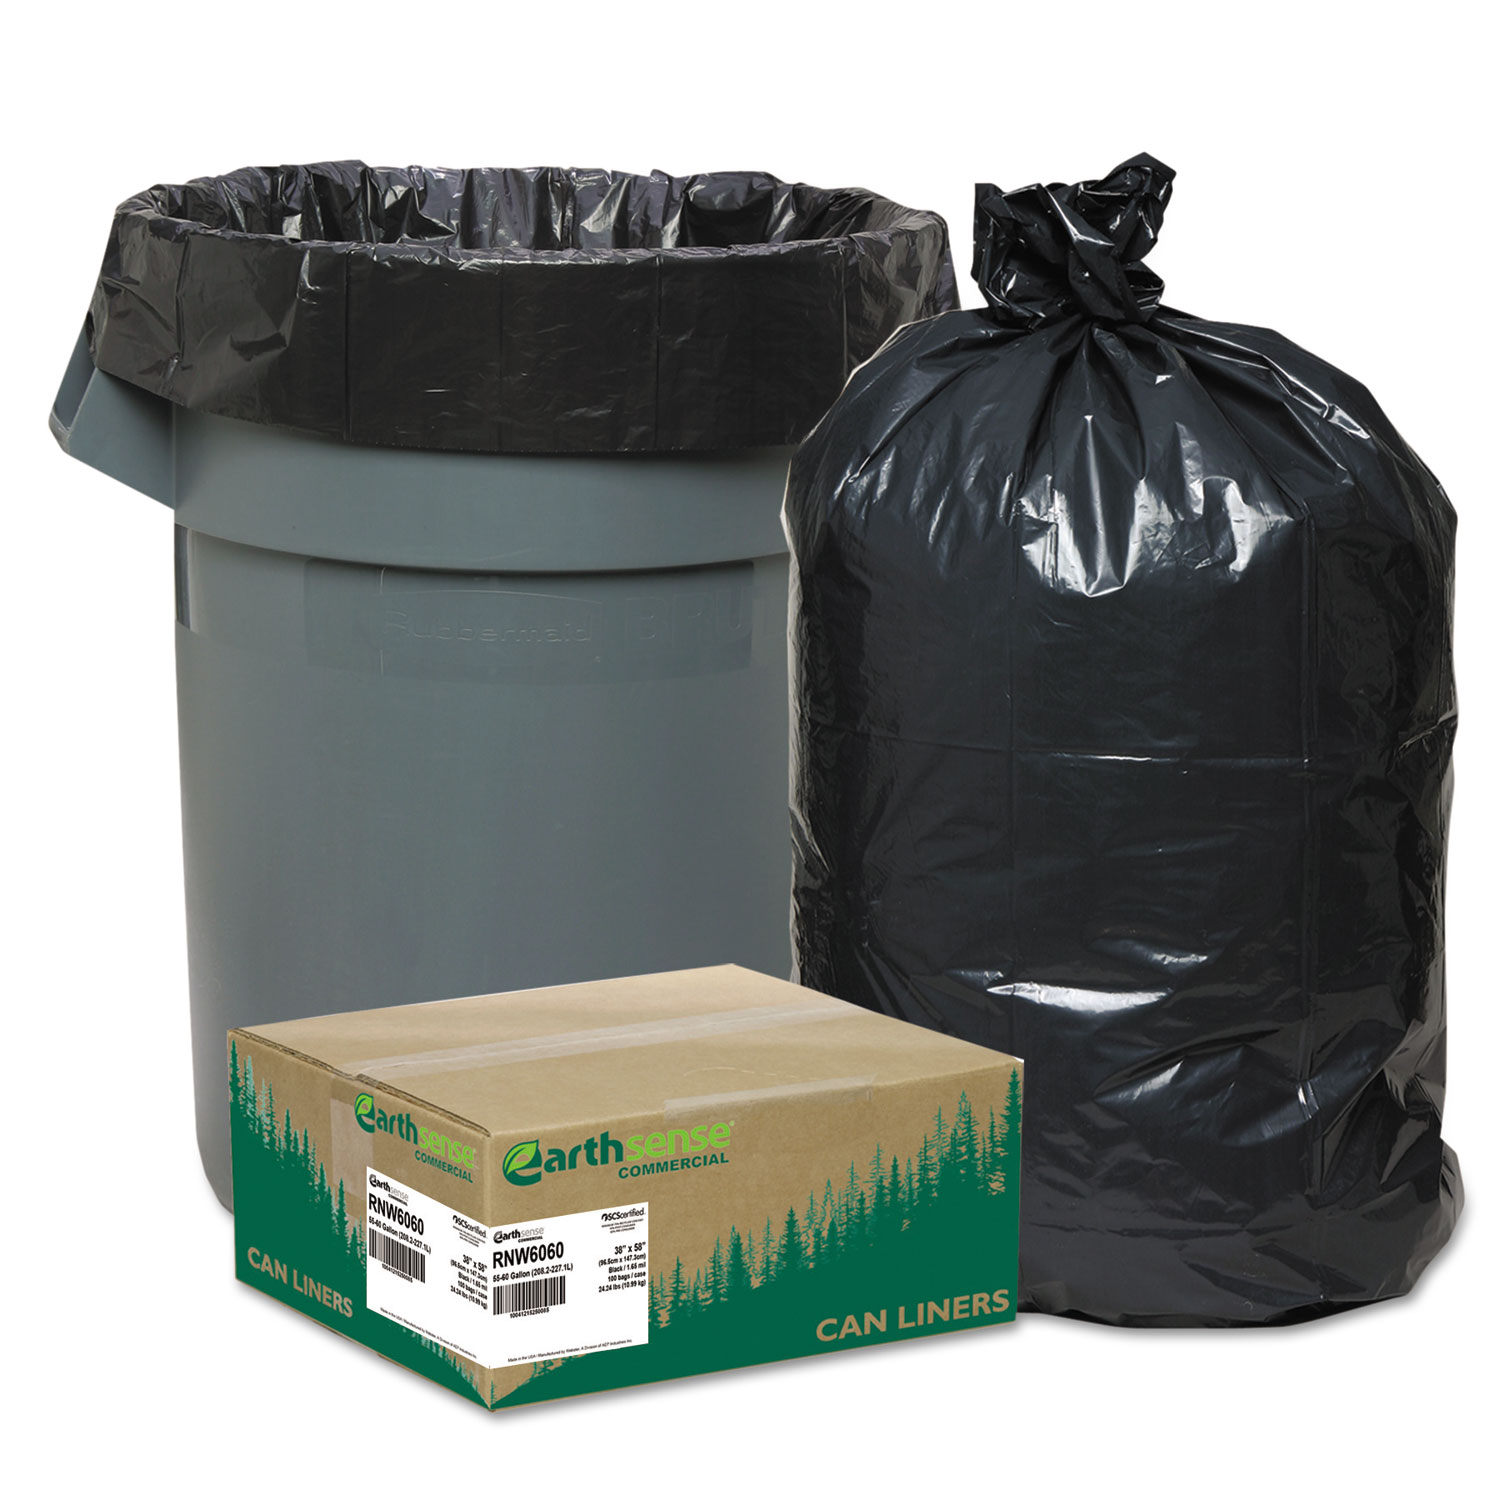  Earthsense Commercial RNW6060 Linear Low Density Recycled Can Liners, 60 gal, 1.65 mil, 38 x 58, Black, 100/Carton (WBIRNW6060) 